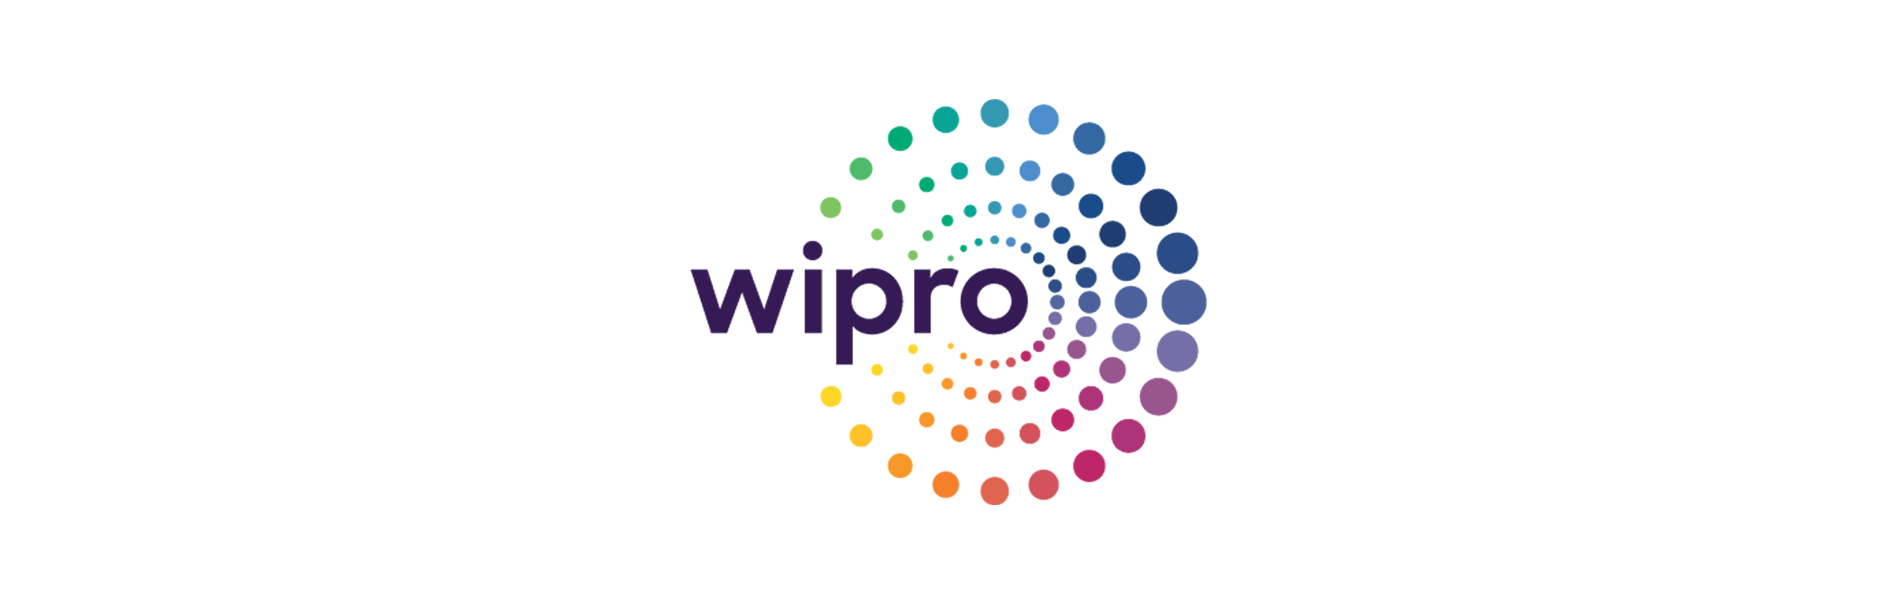 "Wipro Quarter Results: Highlights of Q2 2023 Financial Performance